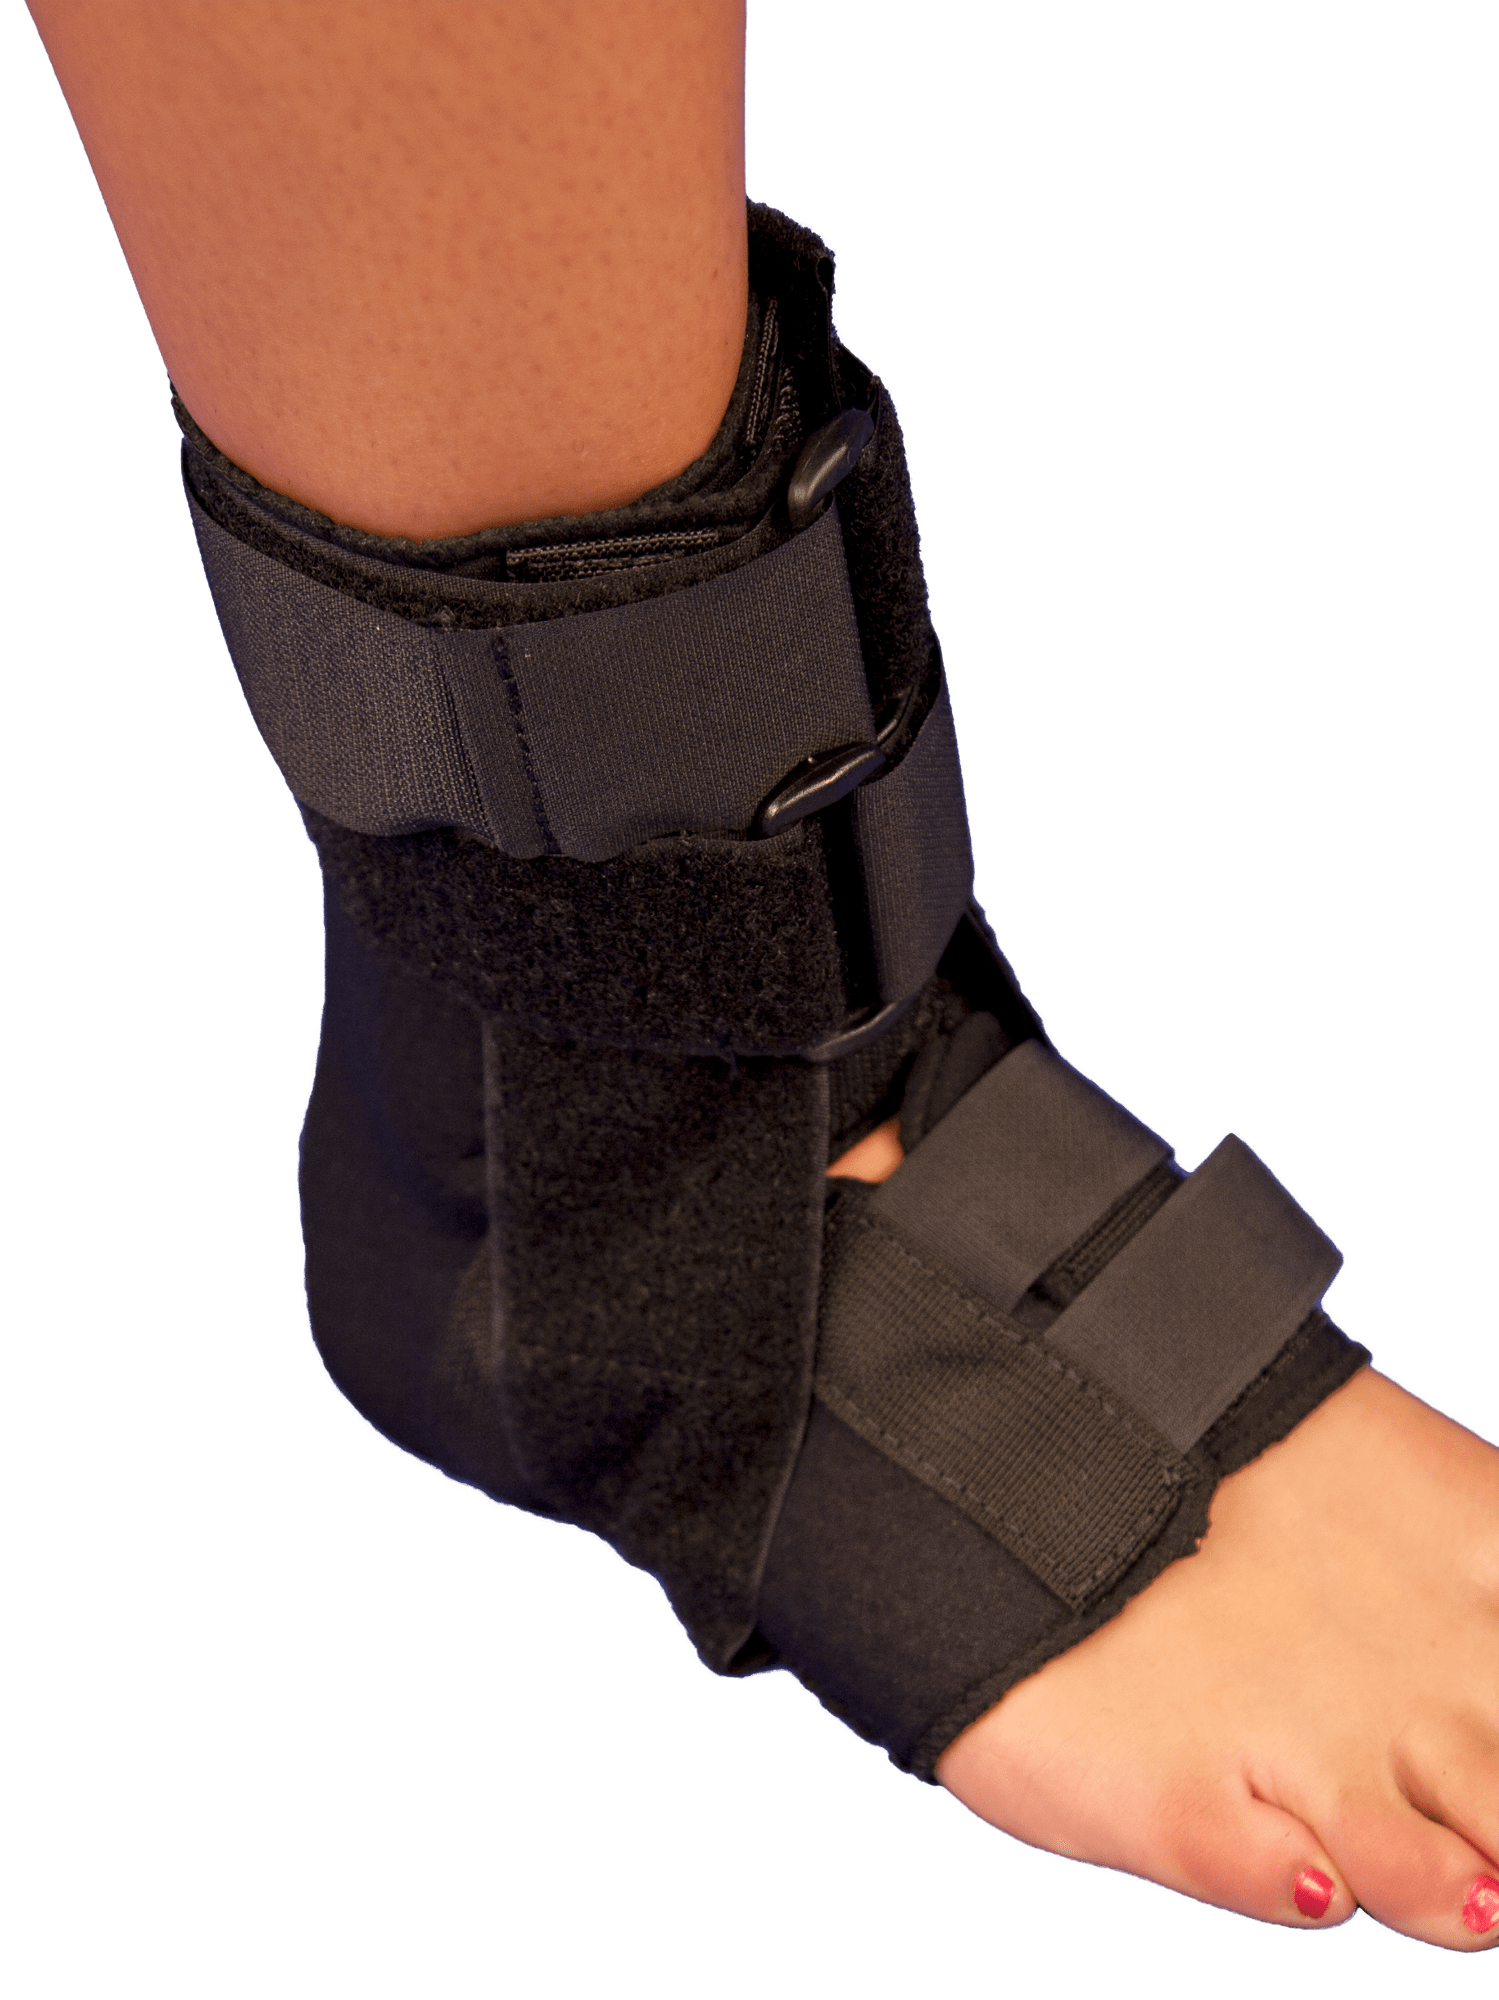 Bunga Dynamic Ankle Support System [AA5]